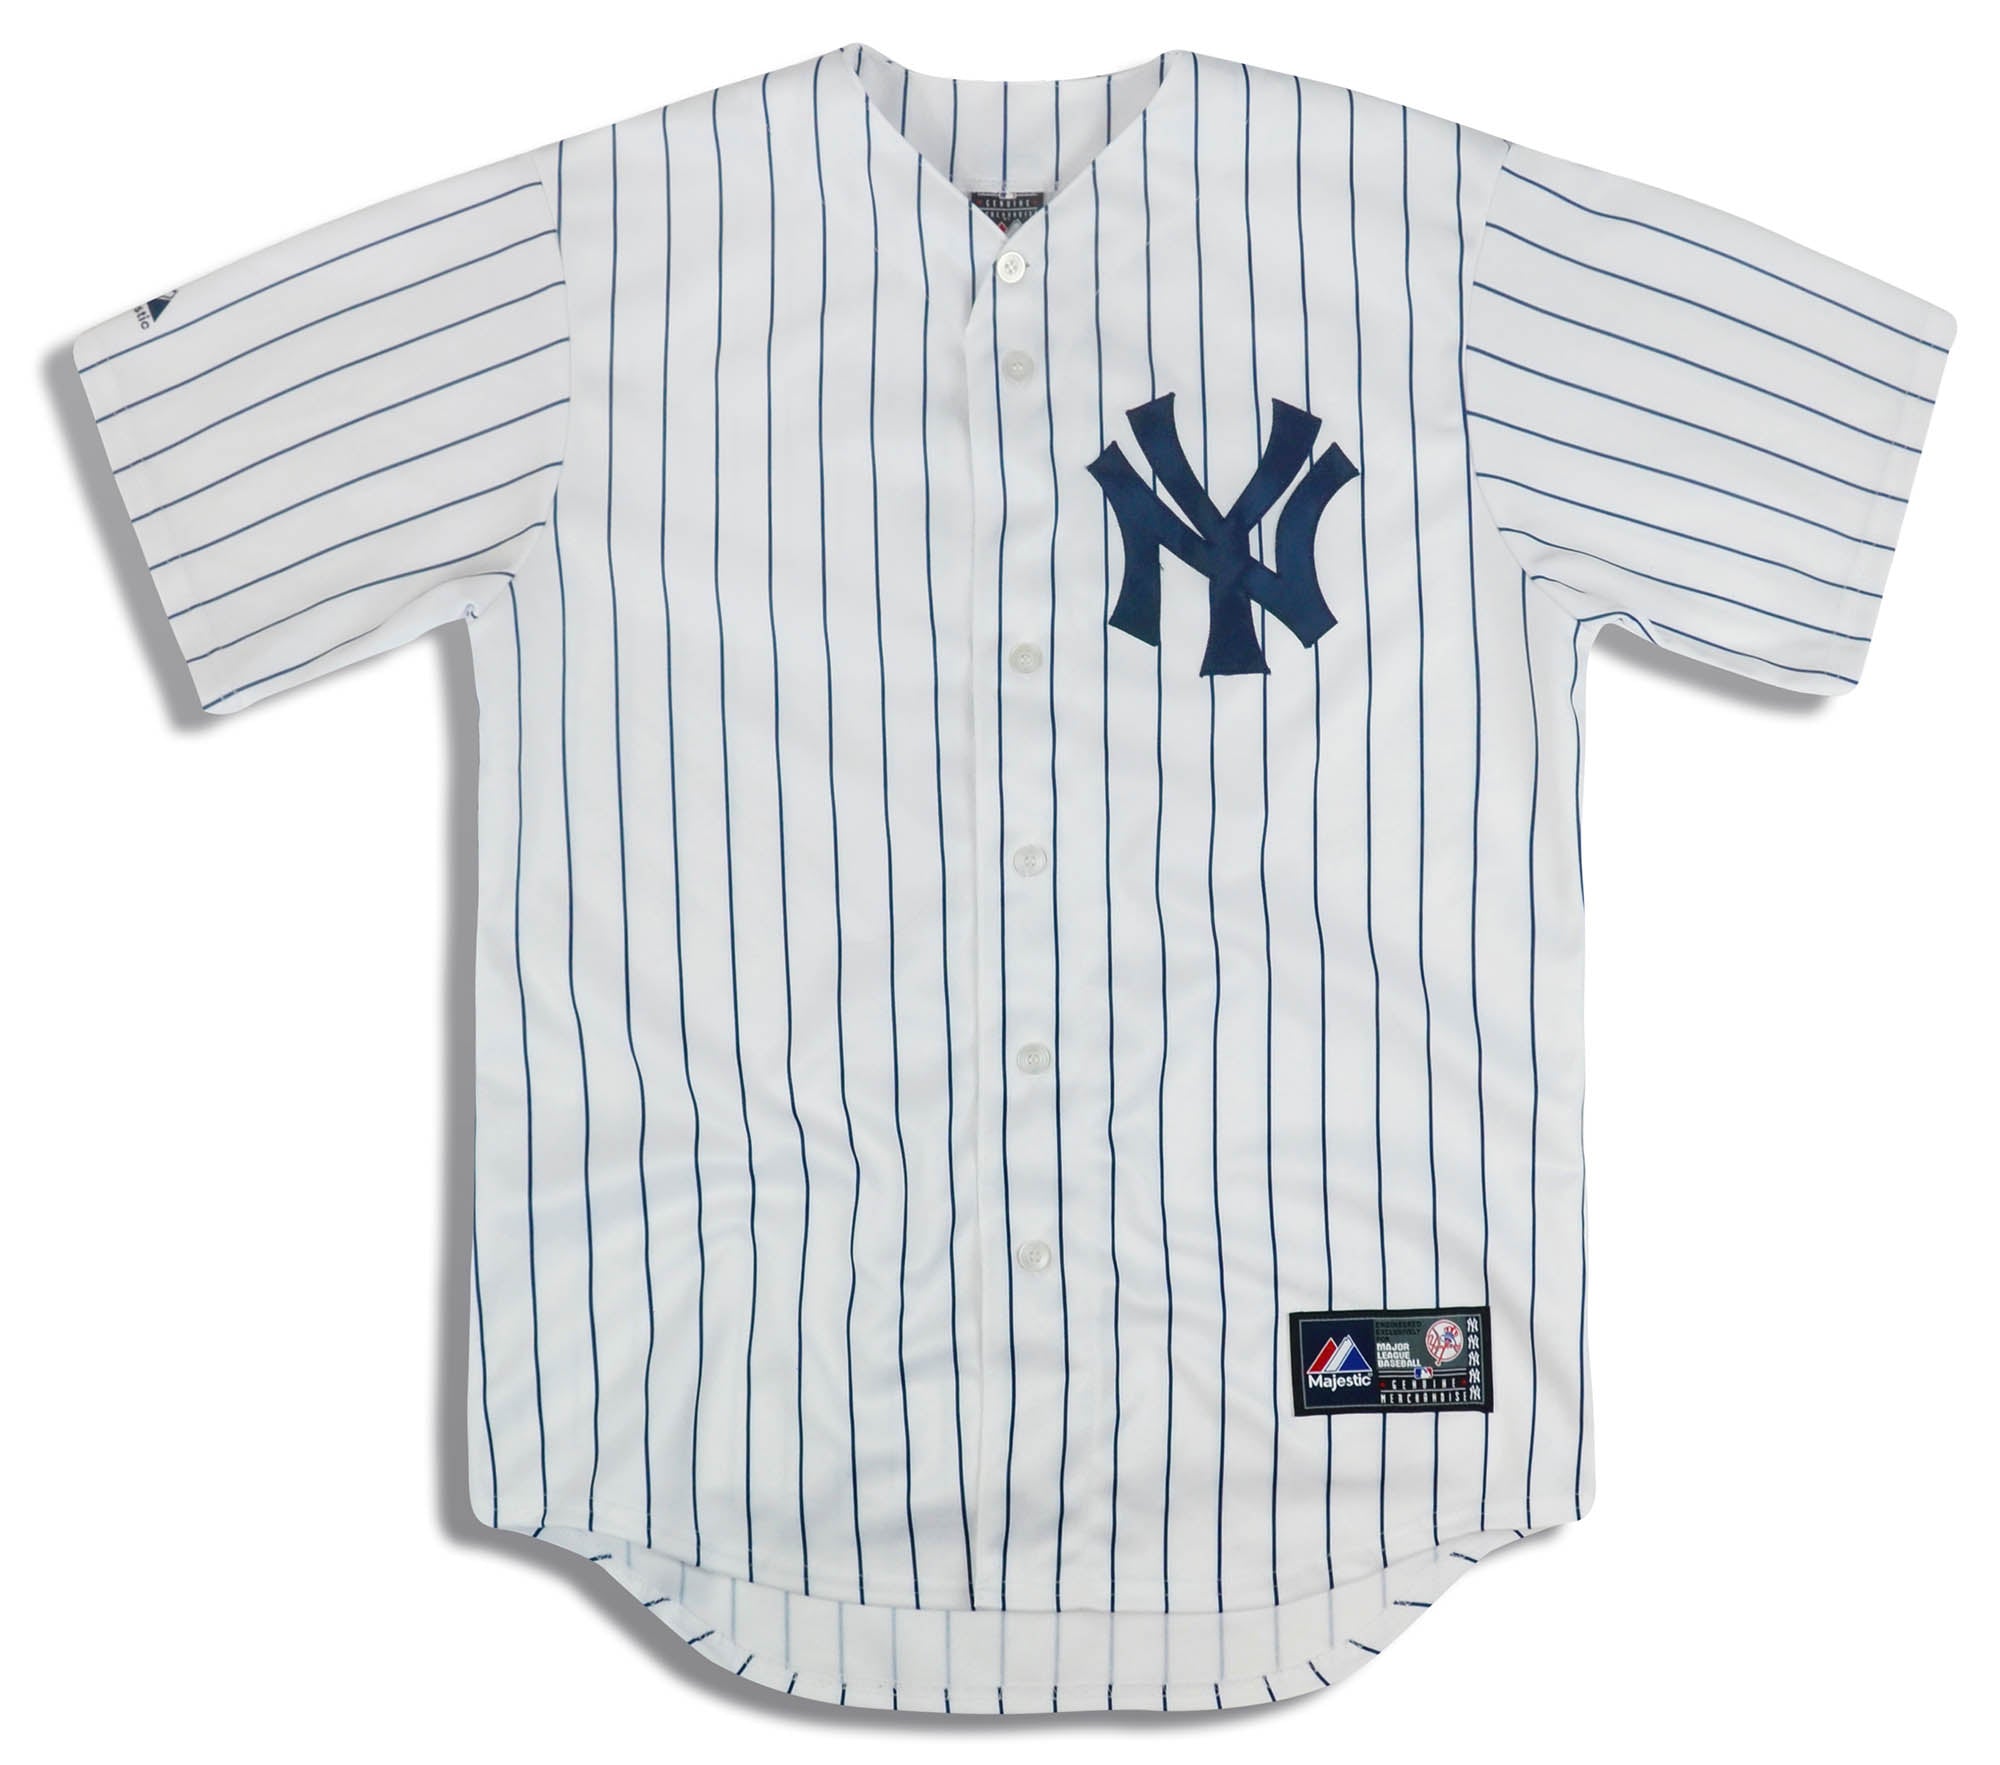 2010-14 NEW YORK YANKEES JETER #2 MAJESTIC JERSEY (HOME) M